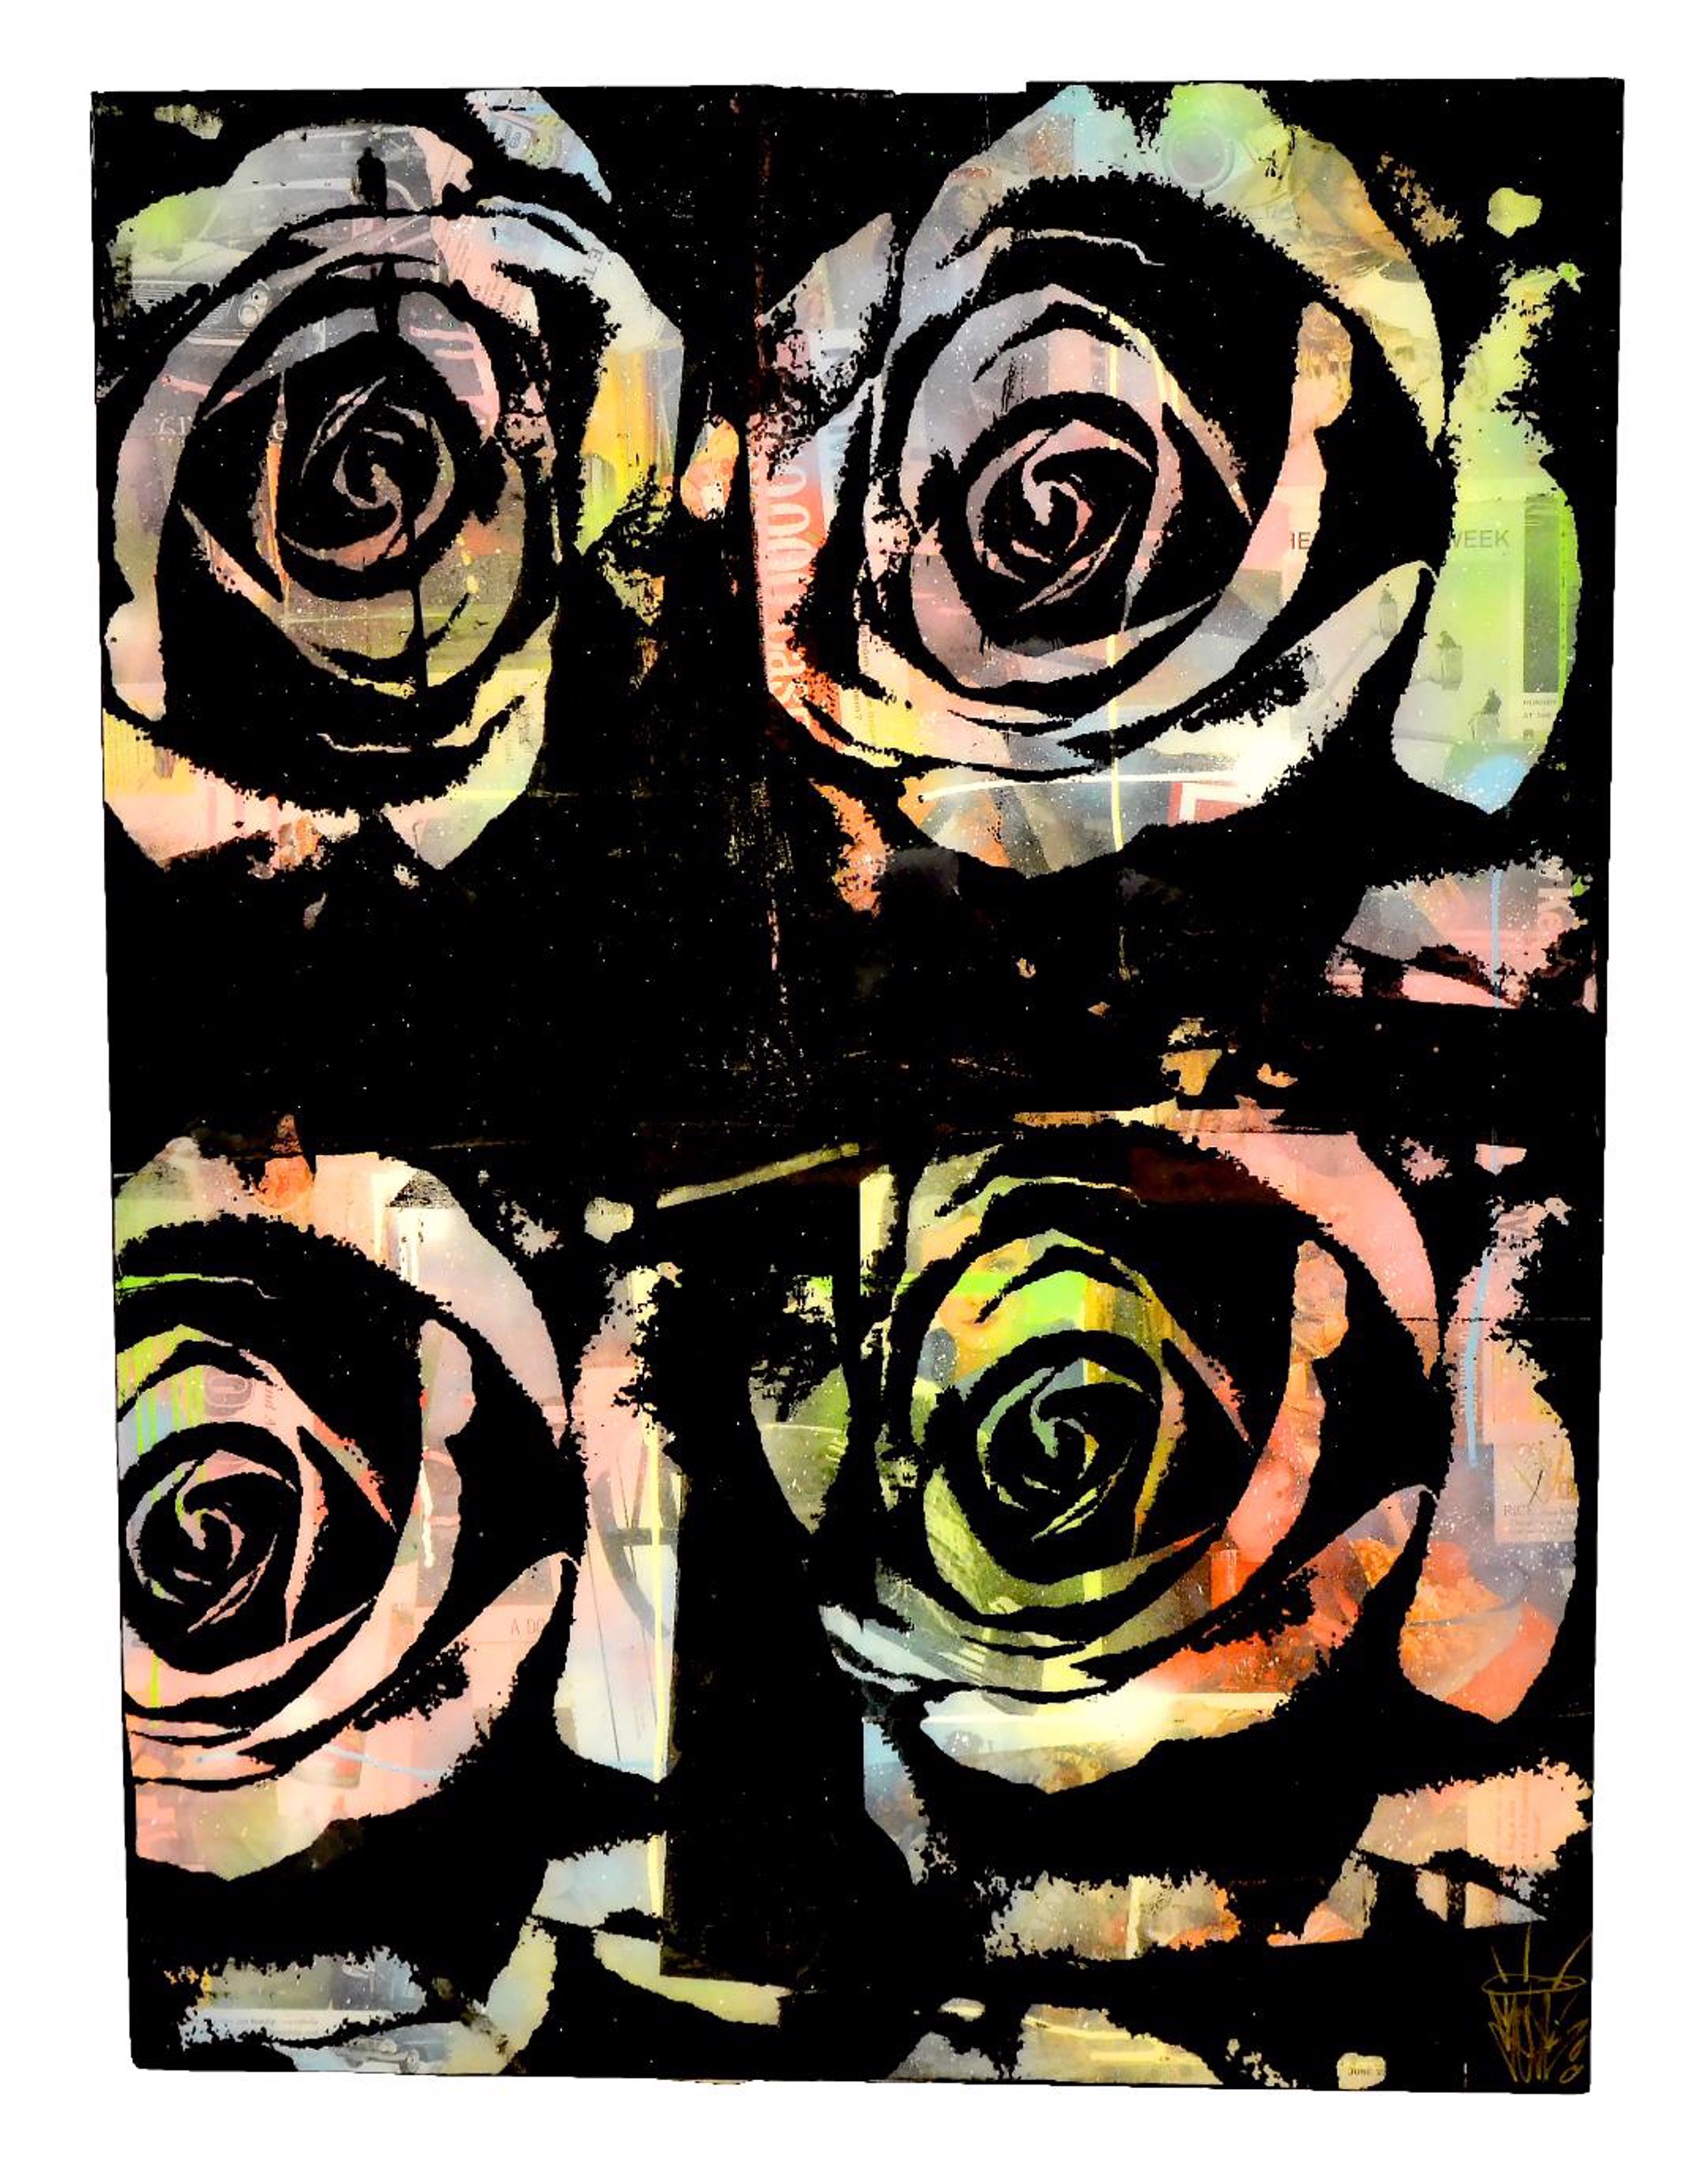 Abstract Rose 1 - SOLD - Commission Available by Seek One